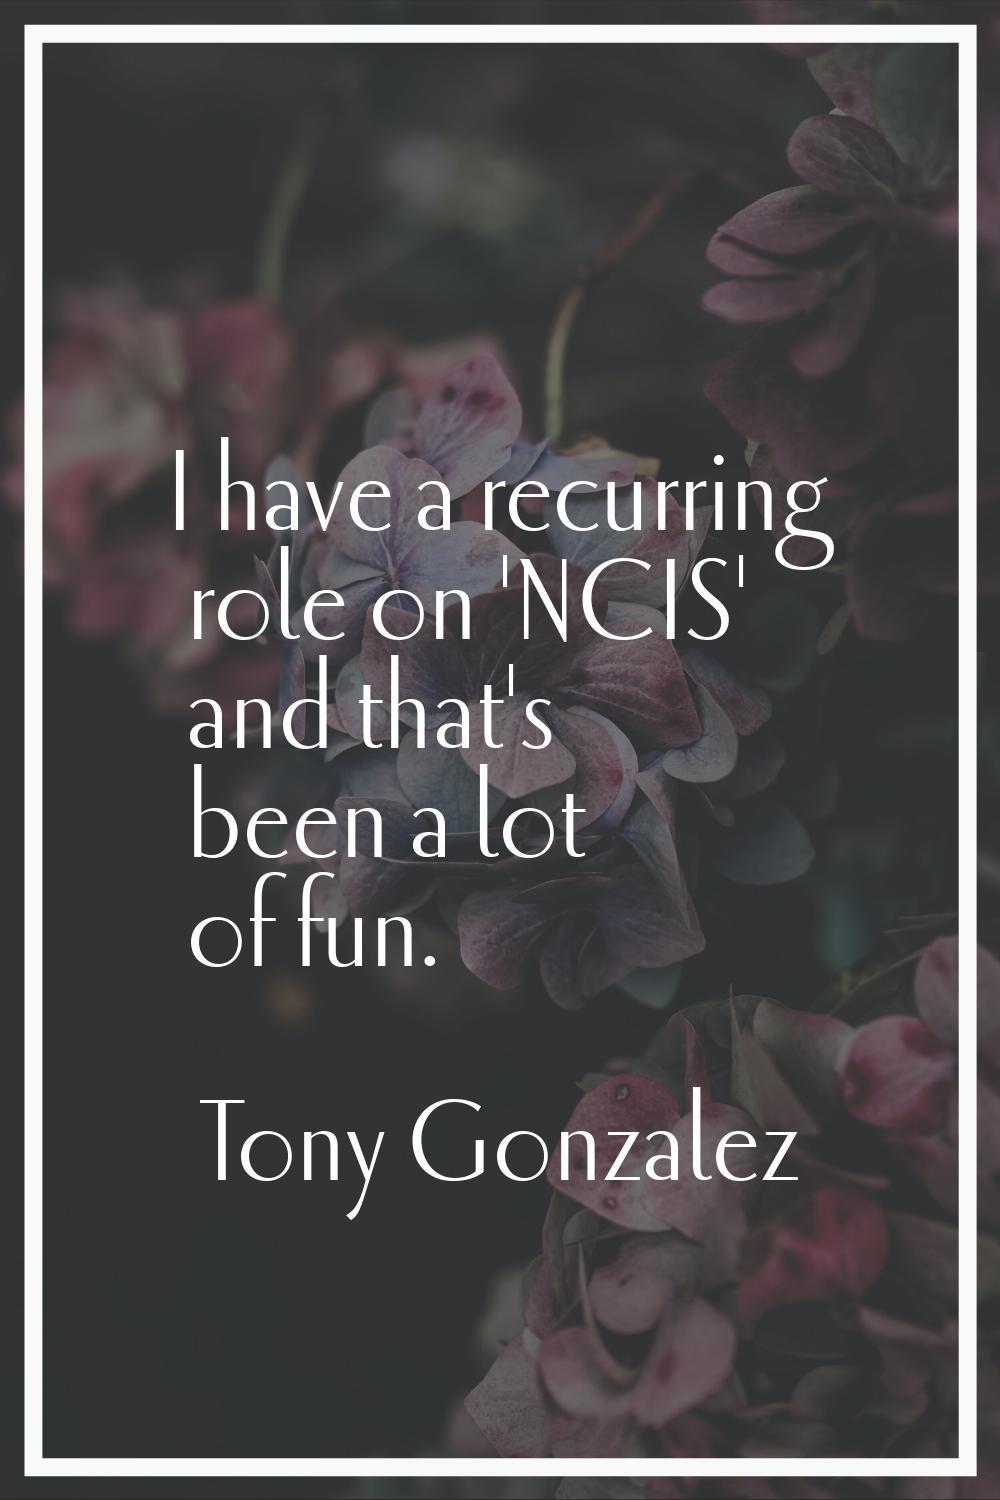 I have a recurring role on 'NCIS' and that's been a lot of fun.